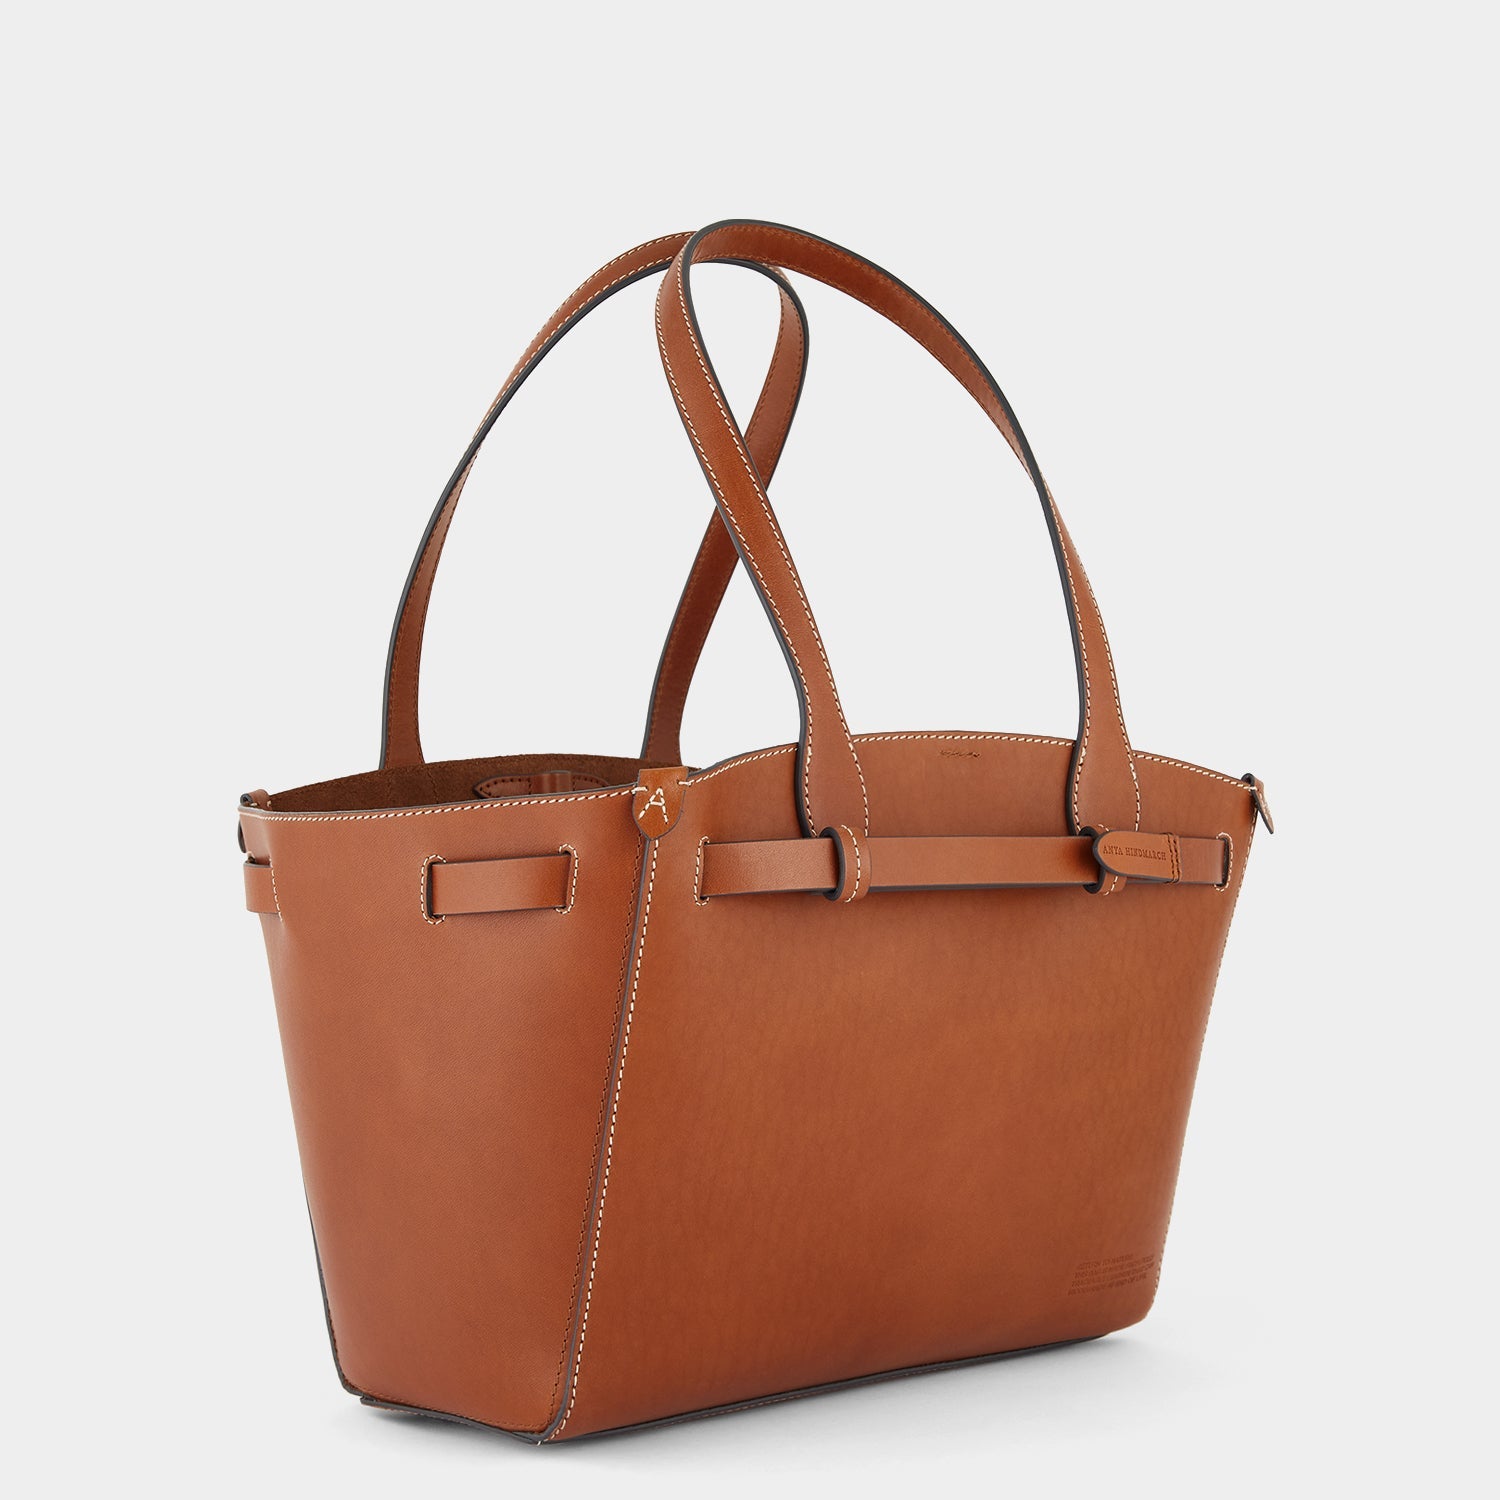 Return to Nature Small Tote -

                  
                    Compostable Leather in Tan -
                  

                  Anya Hindmarch EU
